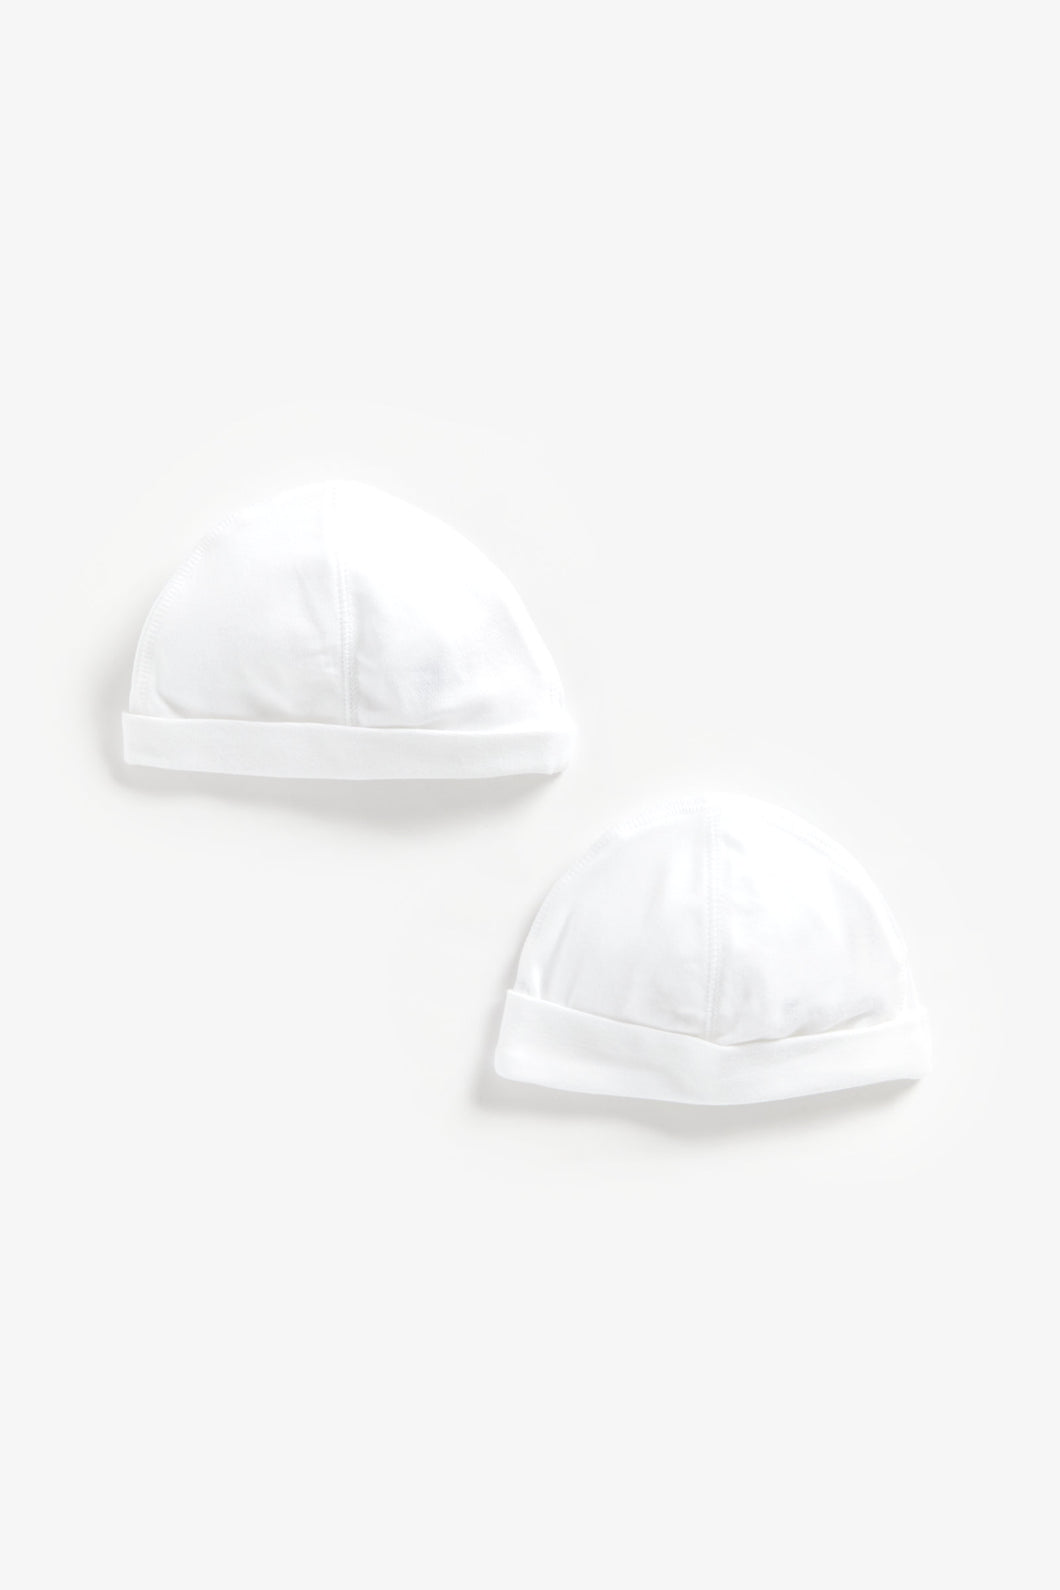 Mothercare White Baby Hats - 2 Pack